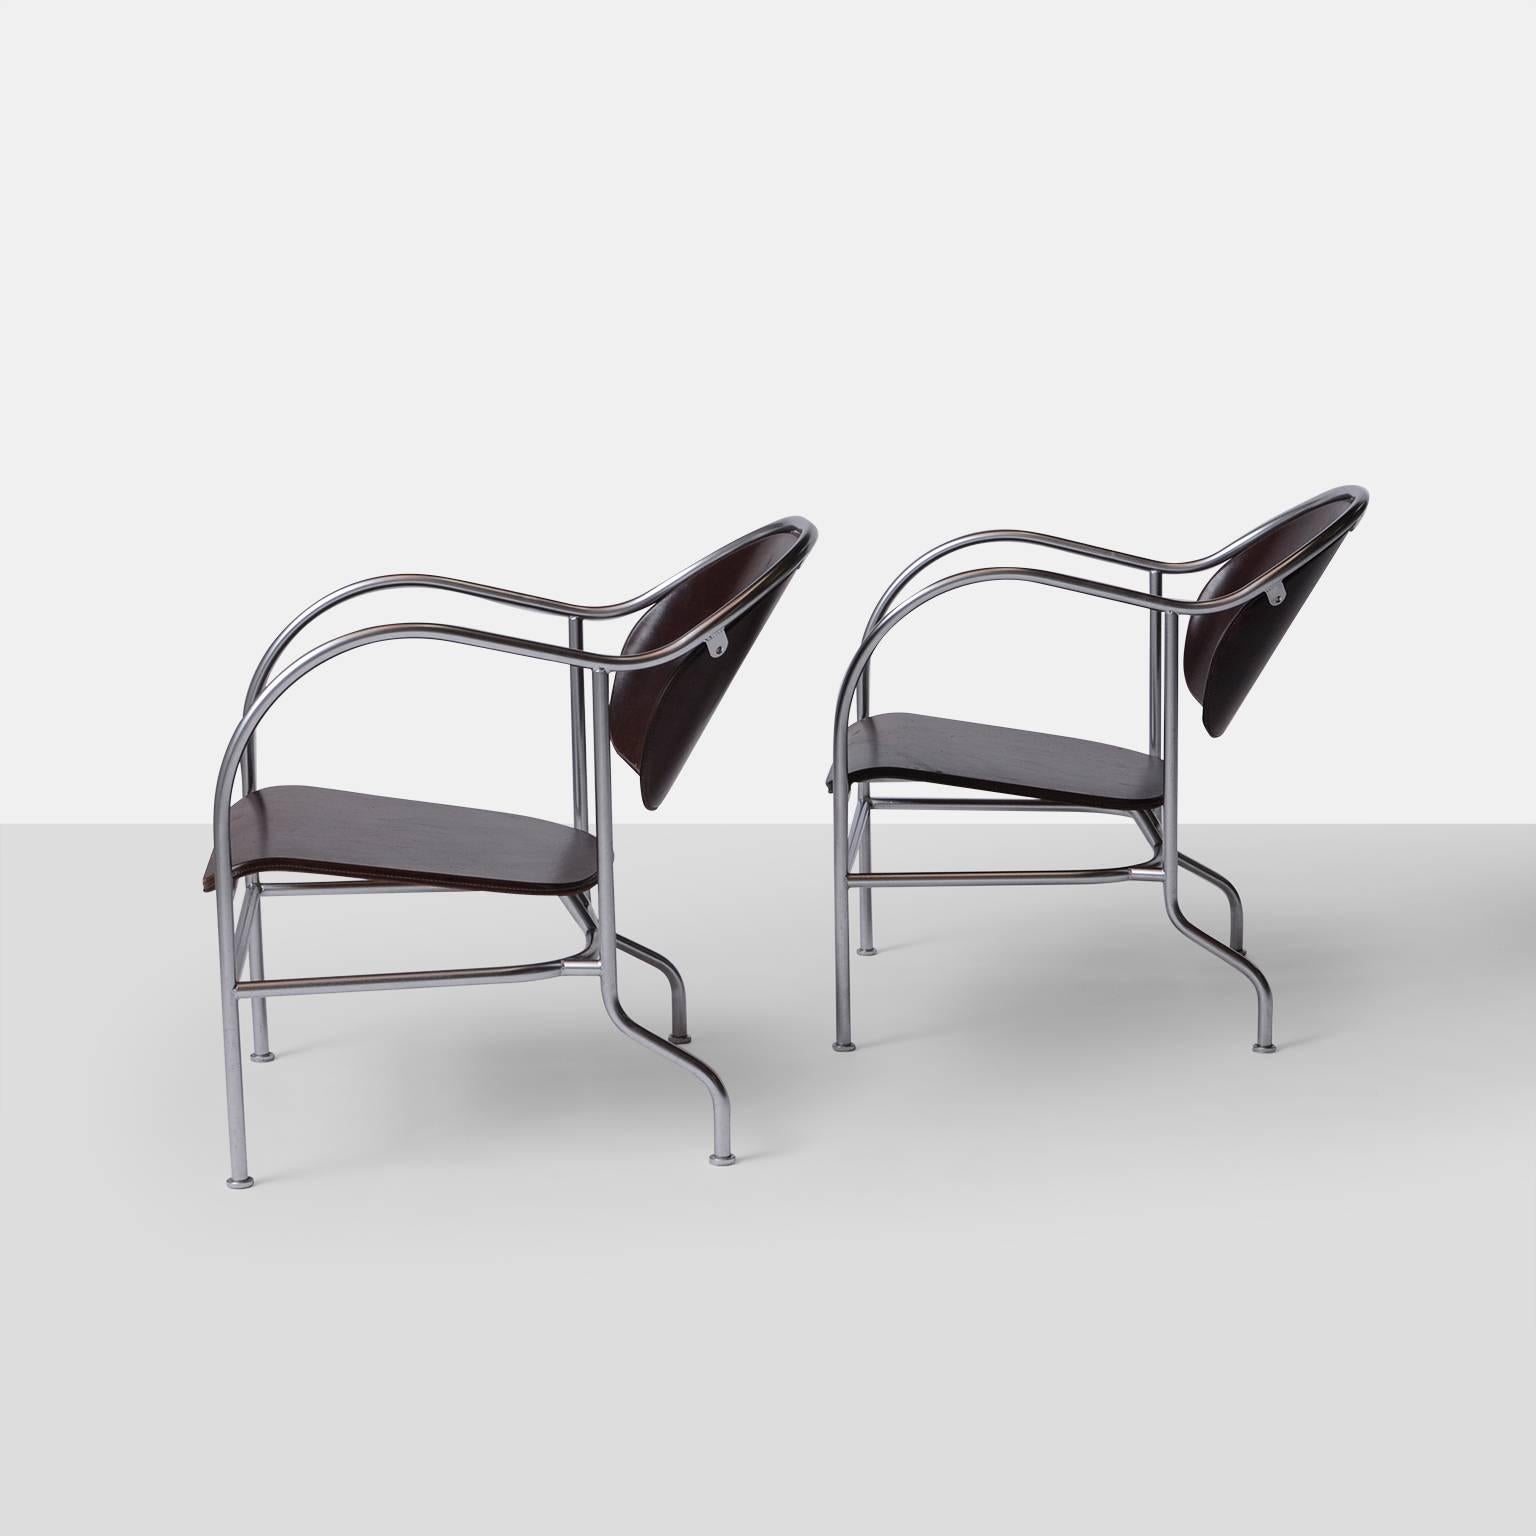 A pair of easy chairs by Mats Theselius model 